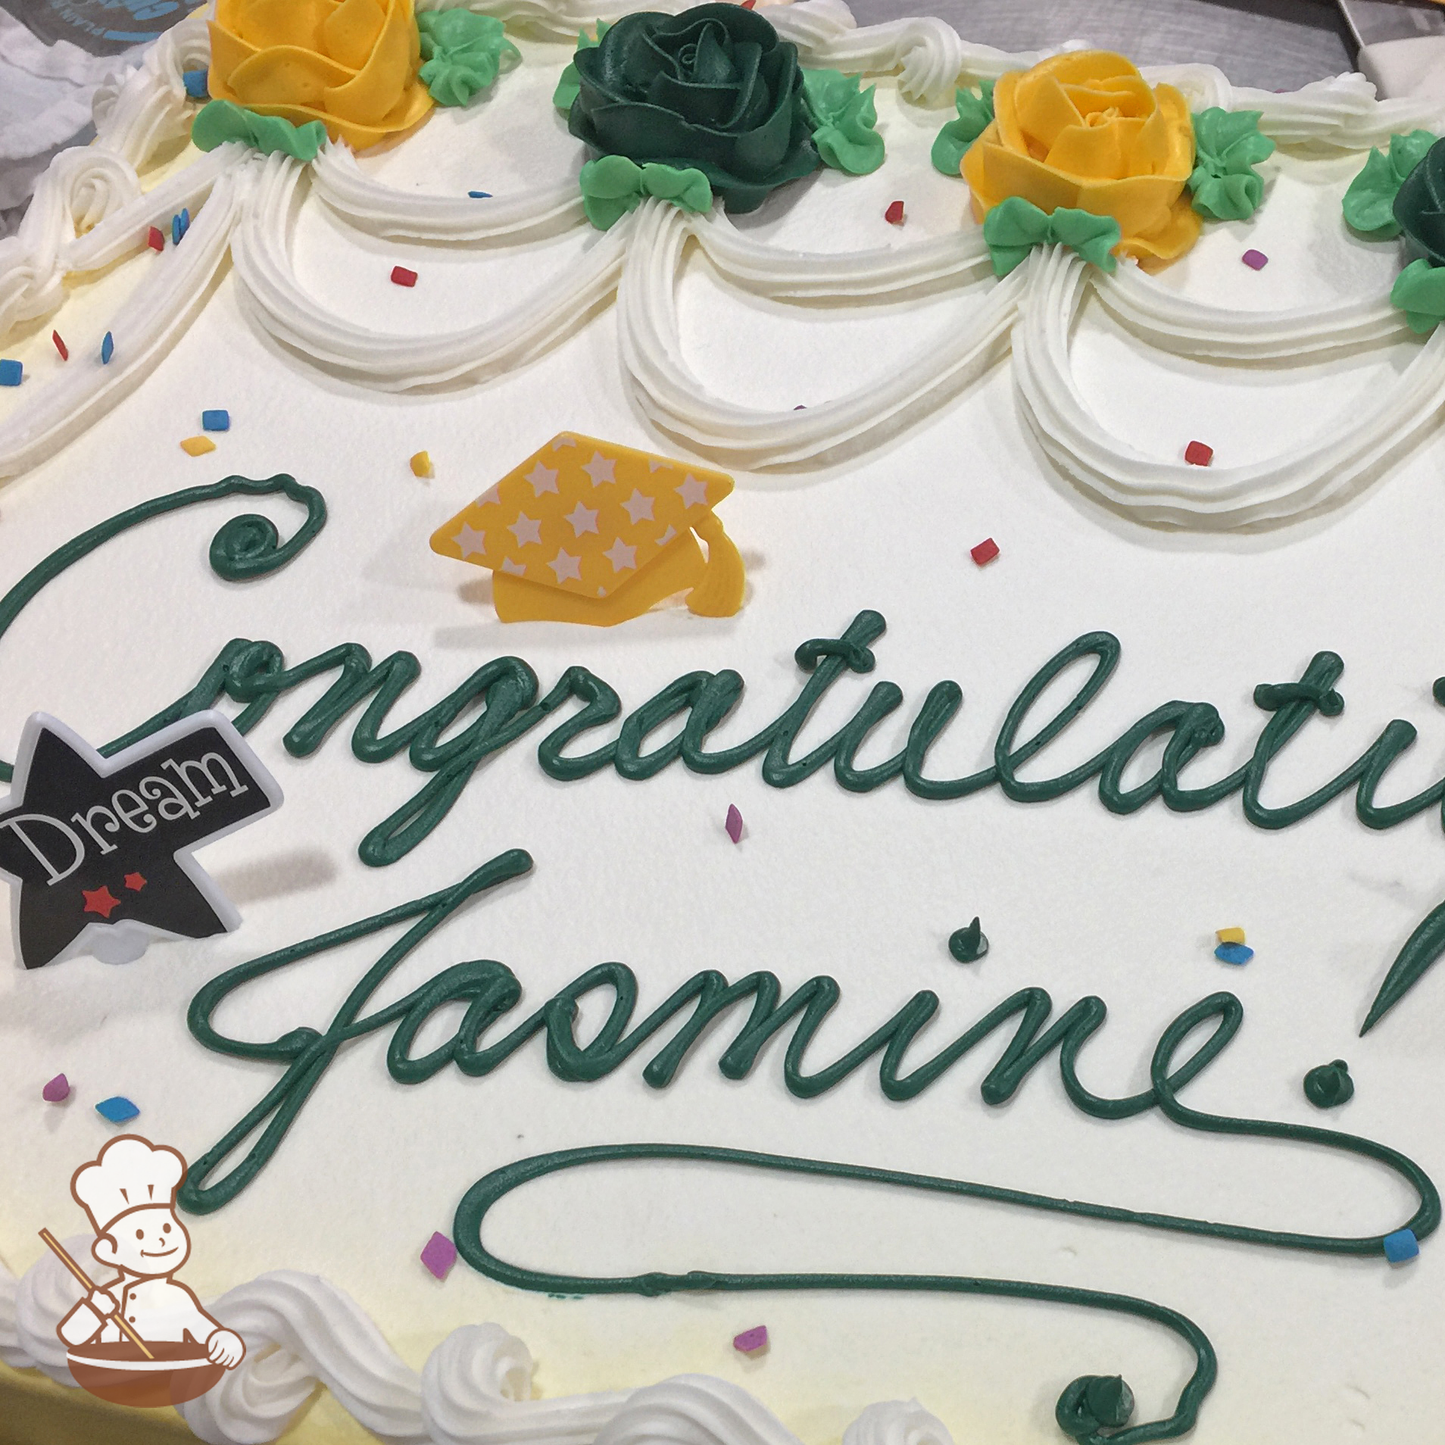 Graduation sheet cake with buttercream roses and piping with sprinkles and fun toy rings including grad's cap and "Dream".